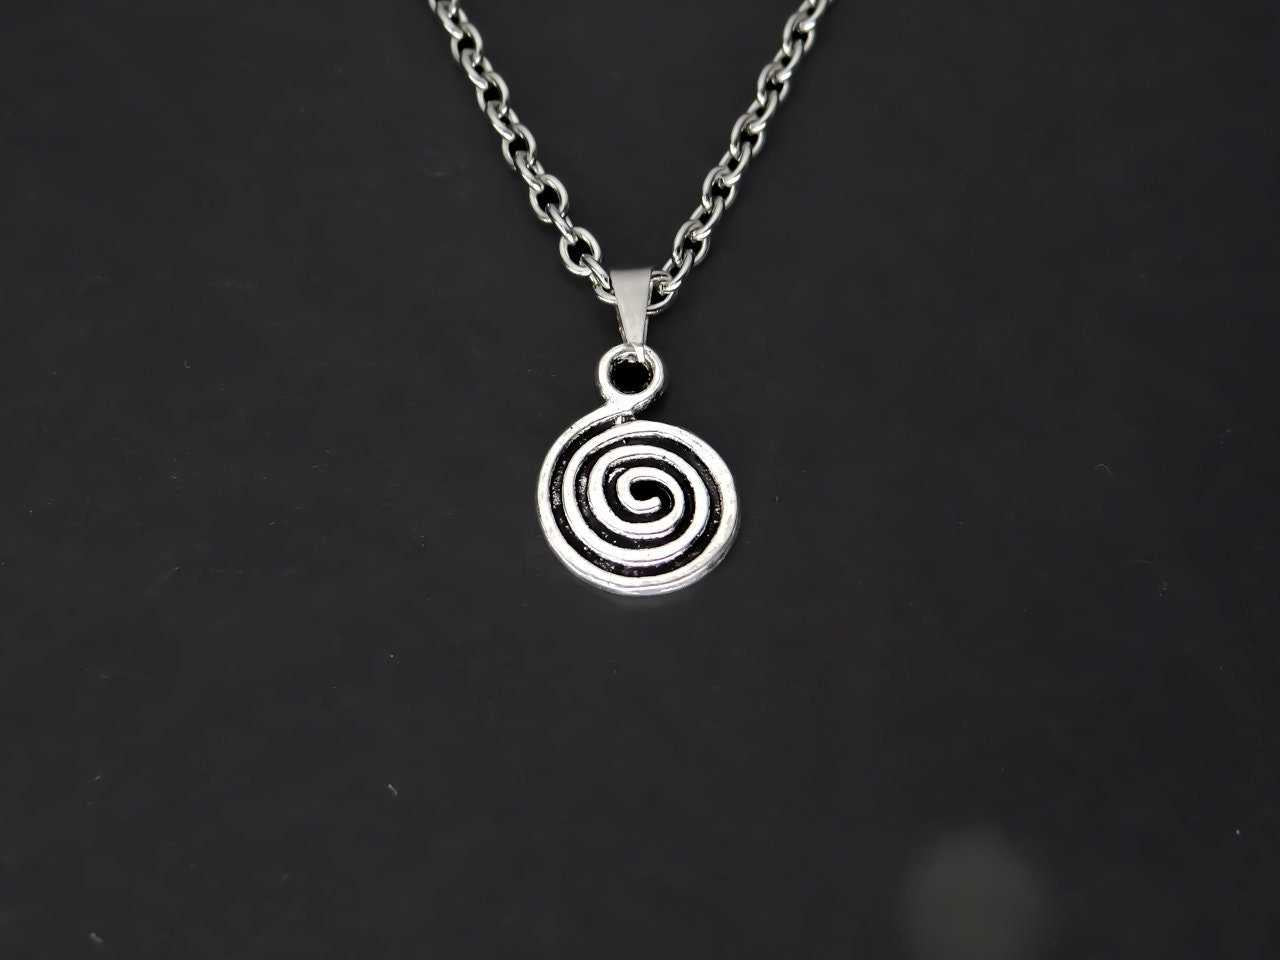 CRW Bohemian Spiral Necklace with 1.6mm rolo chain in silver - Coin Necklaces for Women - Infinite Necklace for Men - Necklace with Pendant